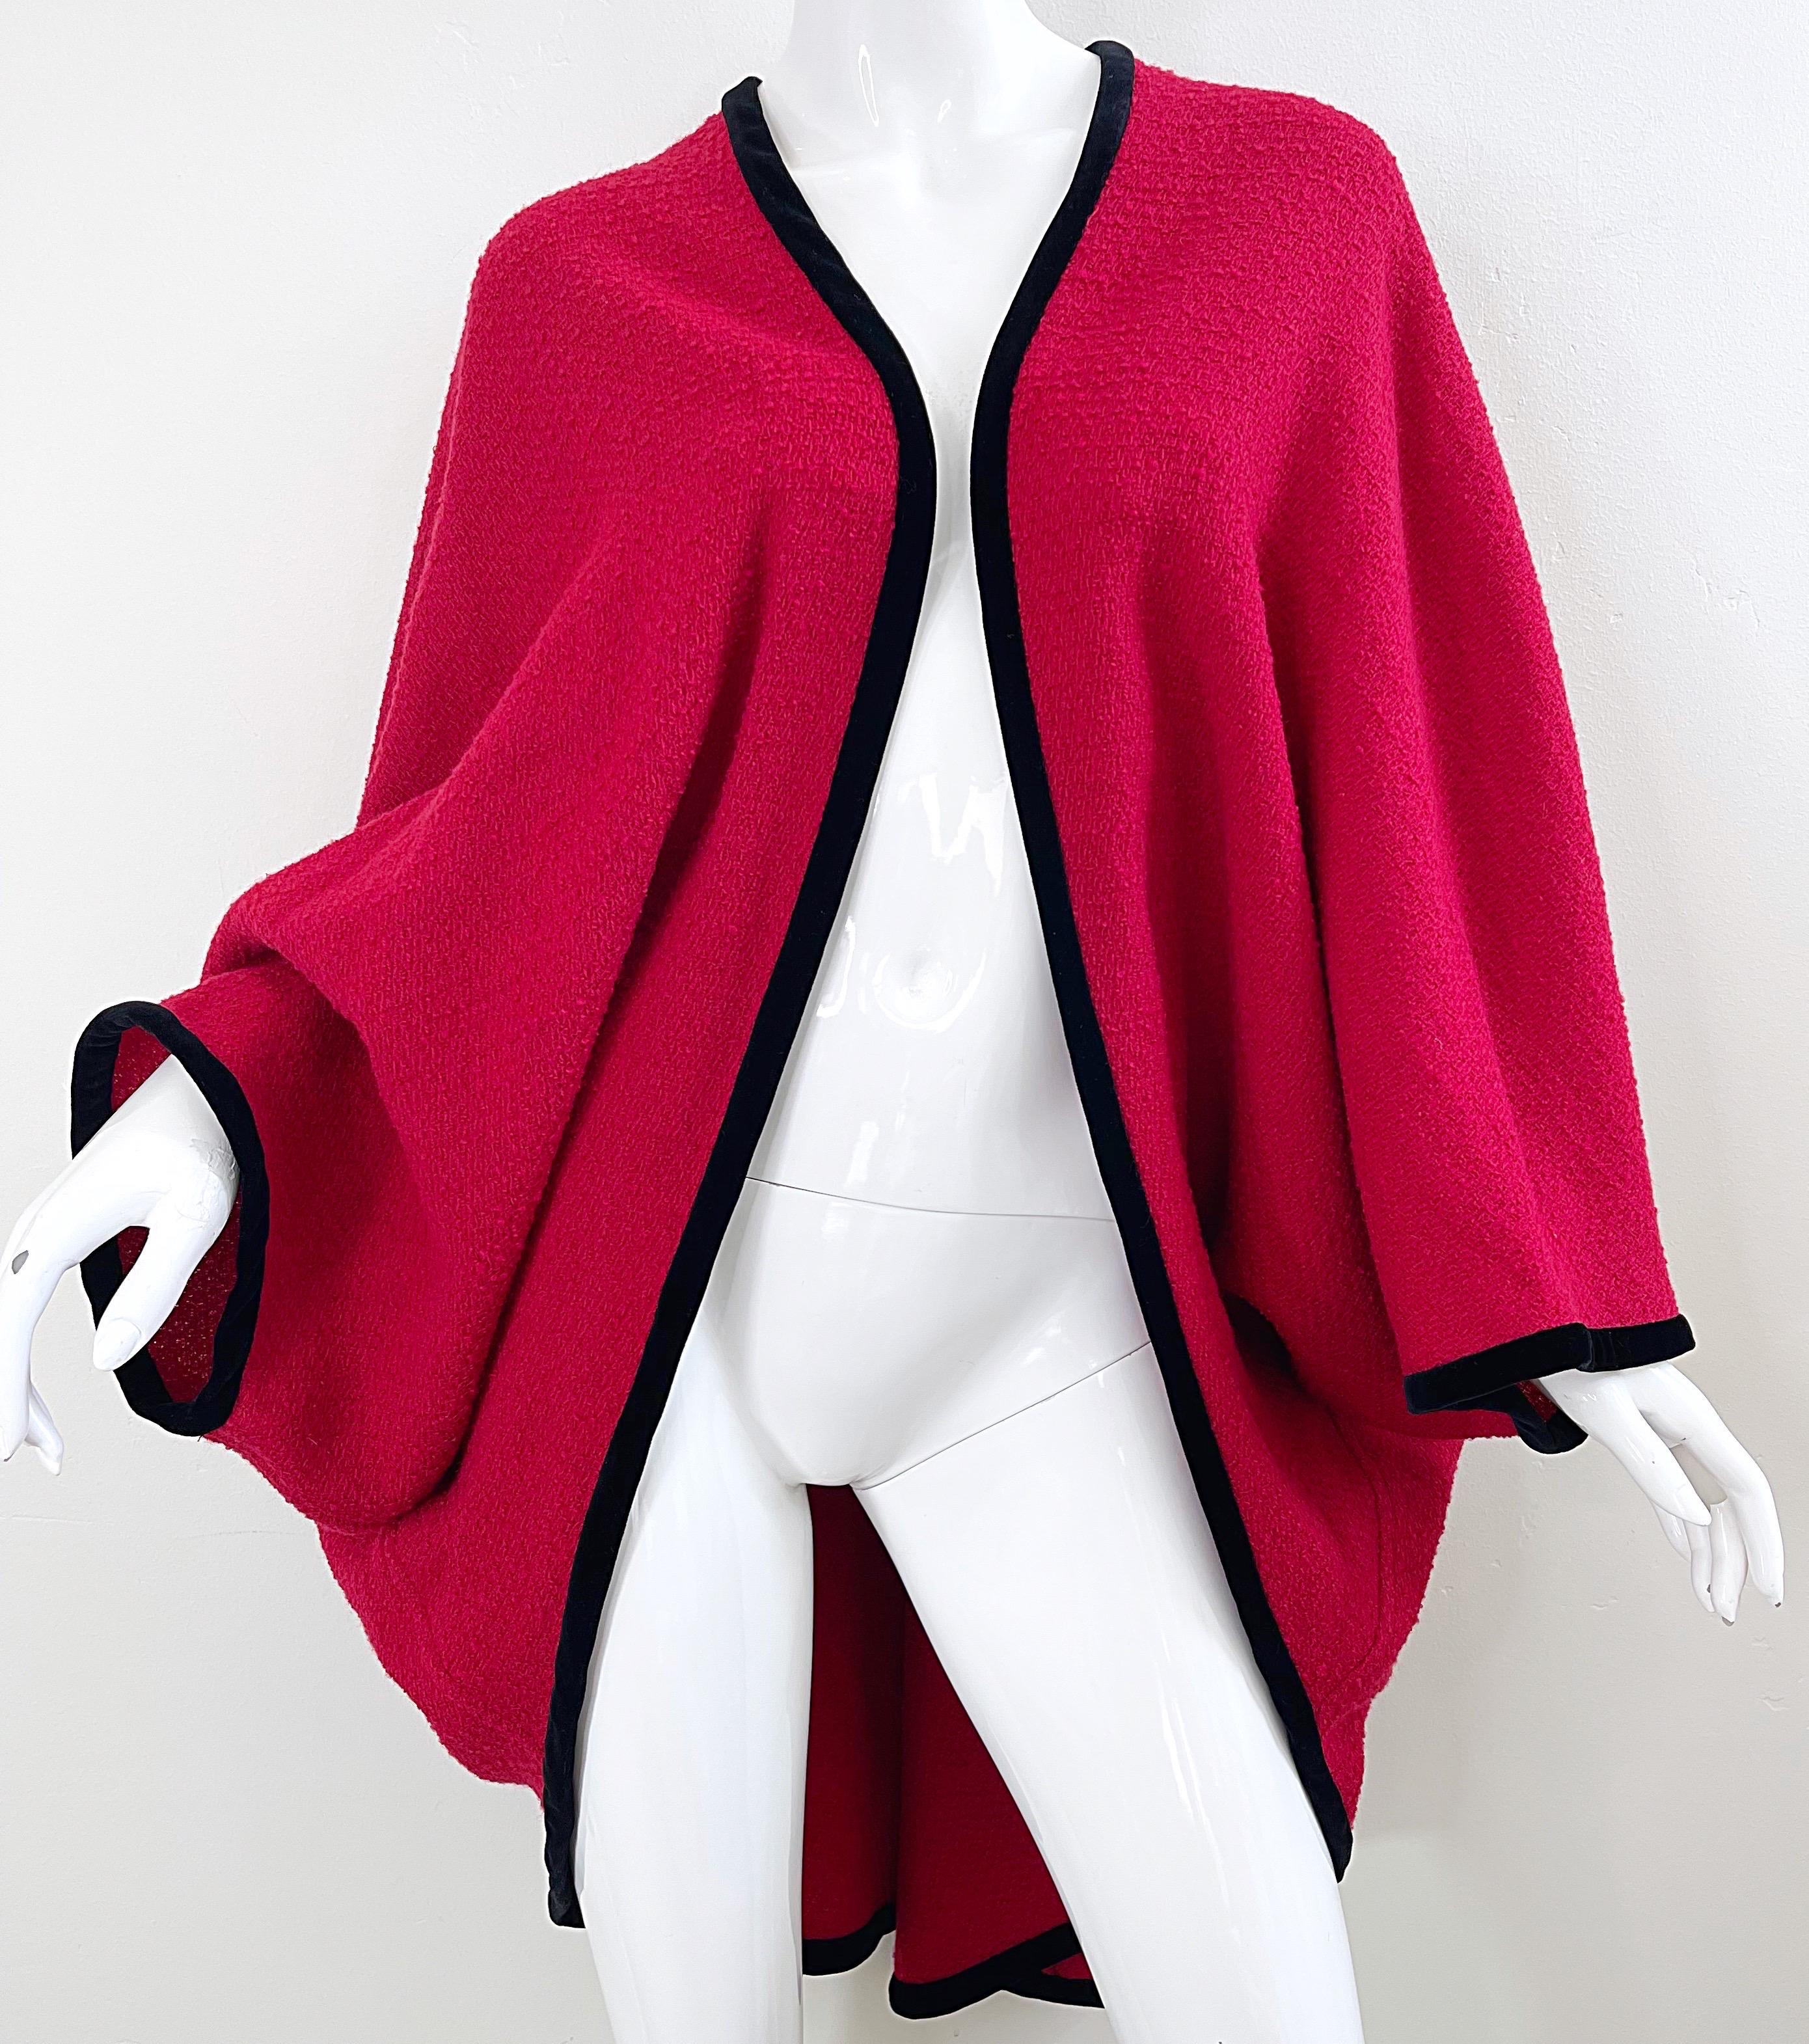 Karl Lagerfeld 1980s Lipstick Red Boiled Wool Cocoon Vintage Cape Kimono Jacket For Sale 1